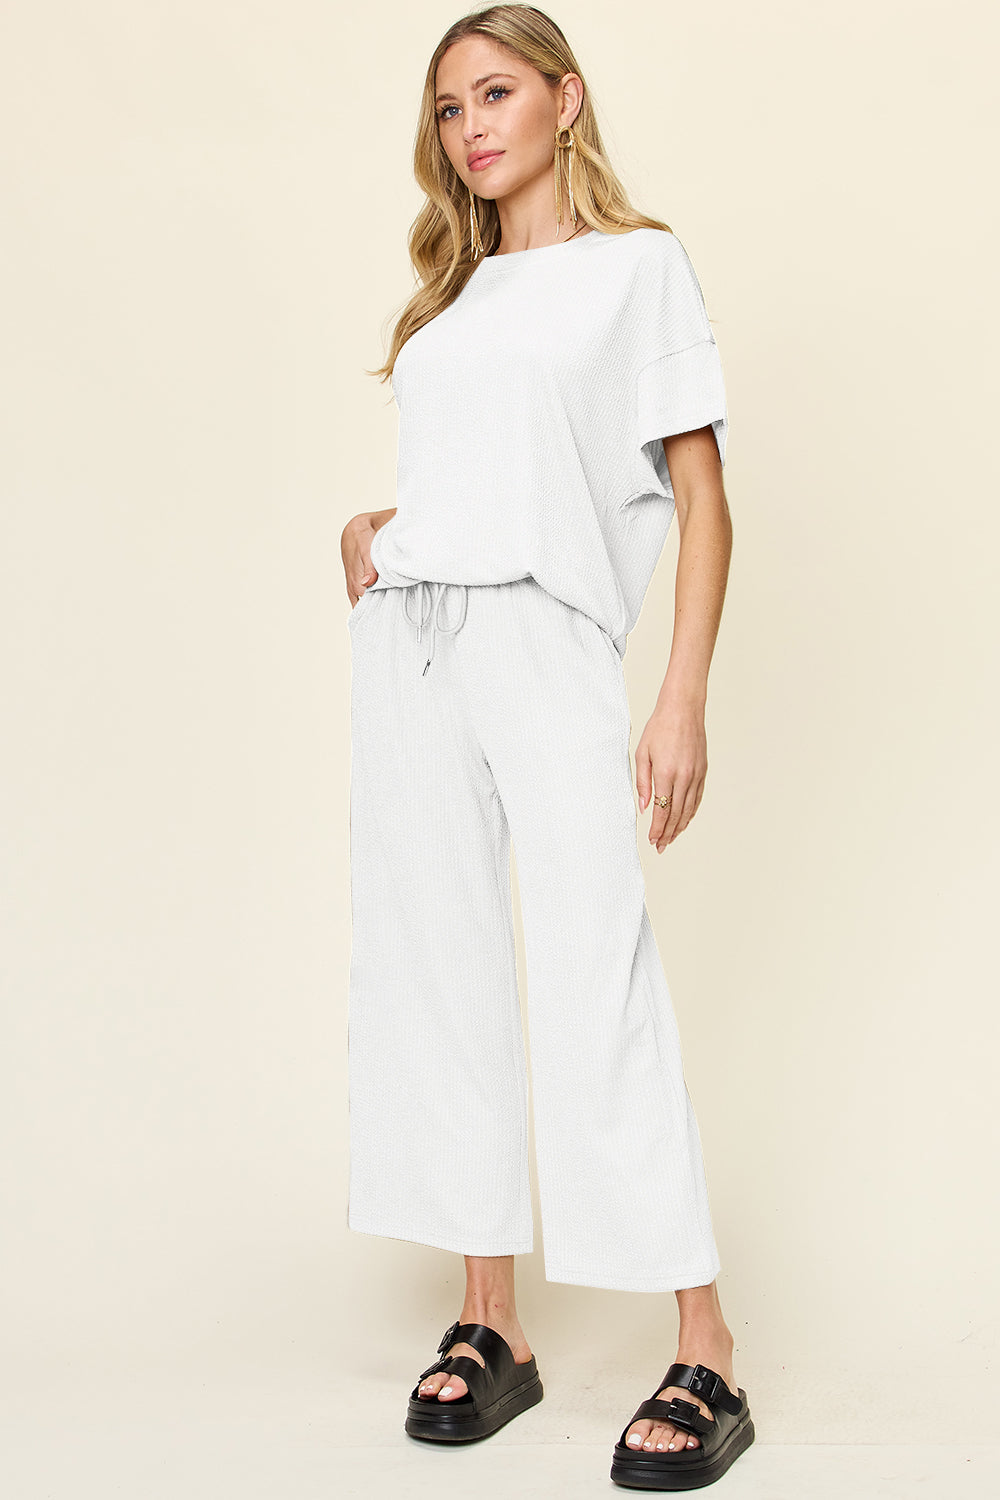 Textured Knit Top and Wide Leg Pant Set White